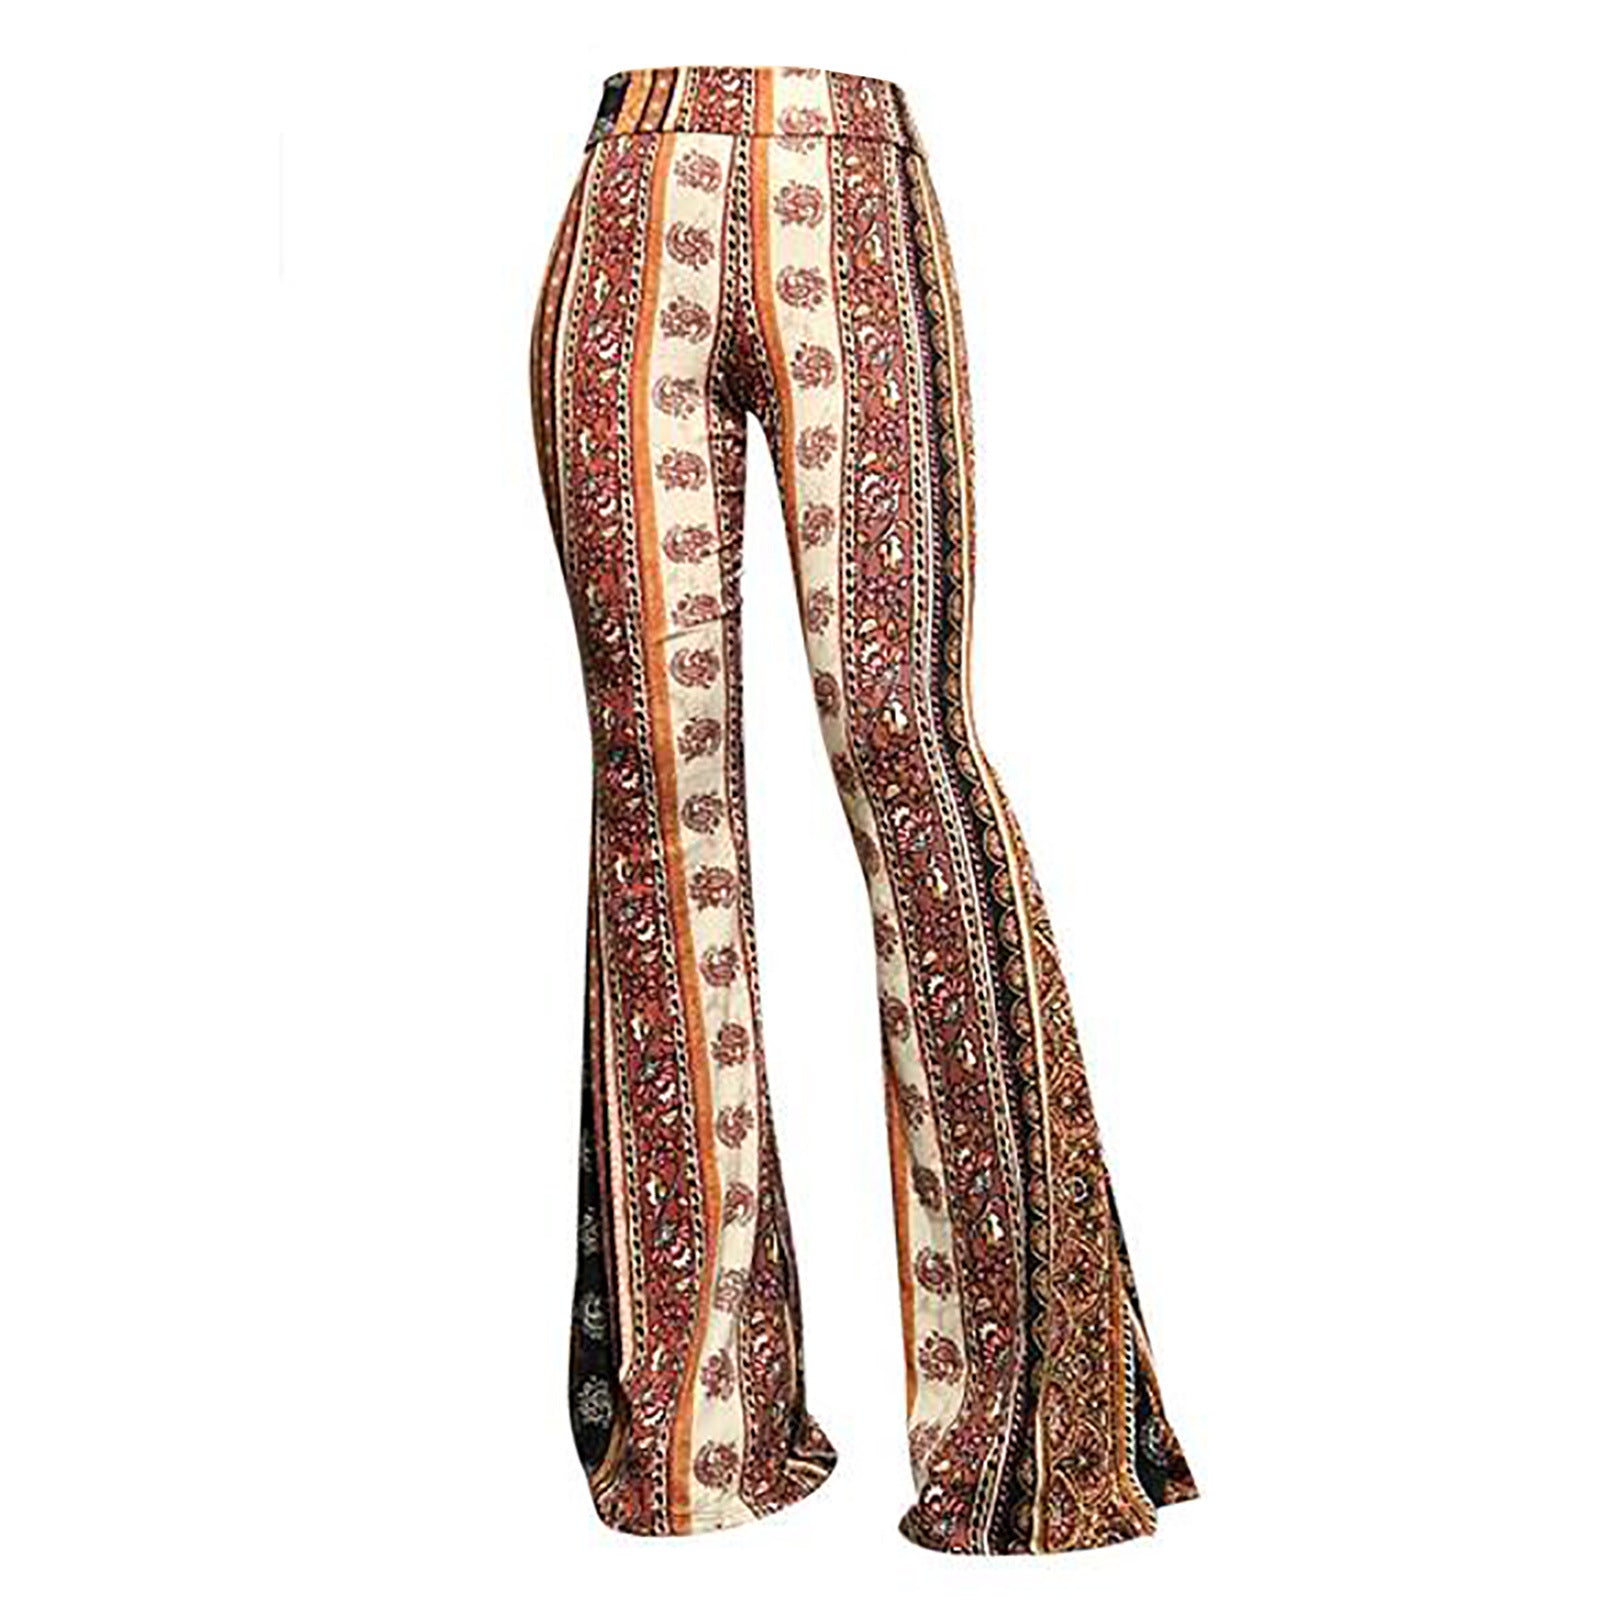 Turning heads with these pants . . . #forbiddenpants